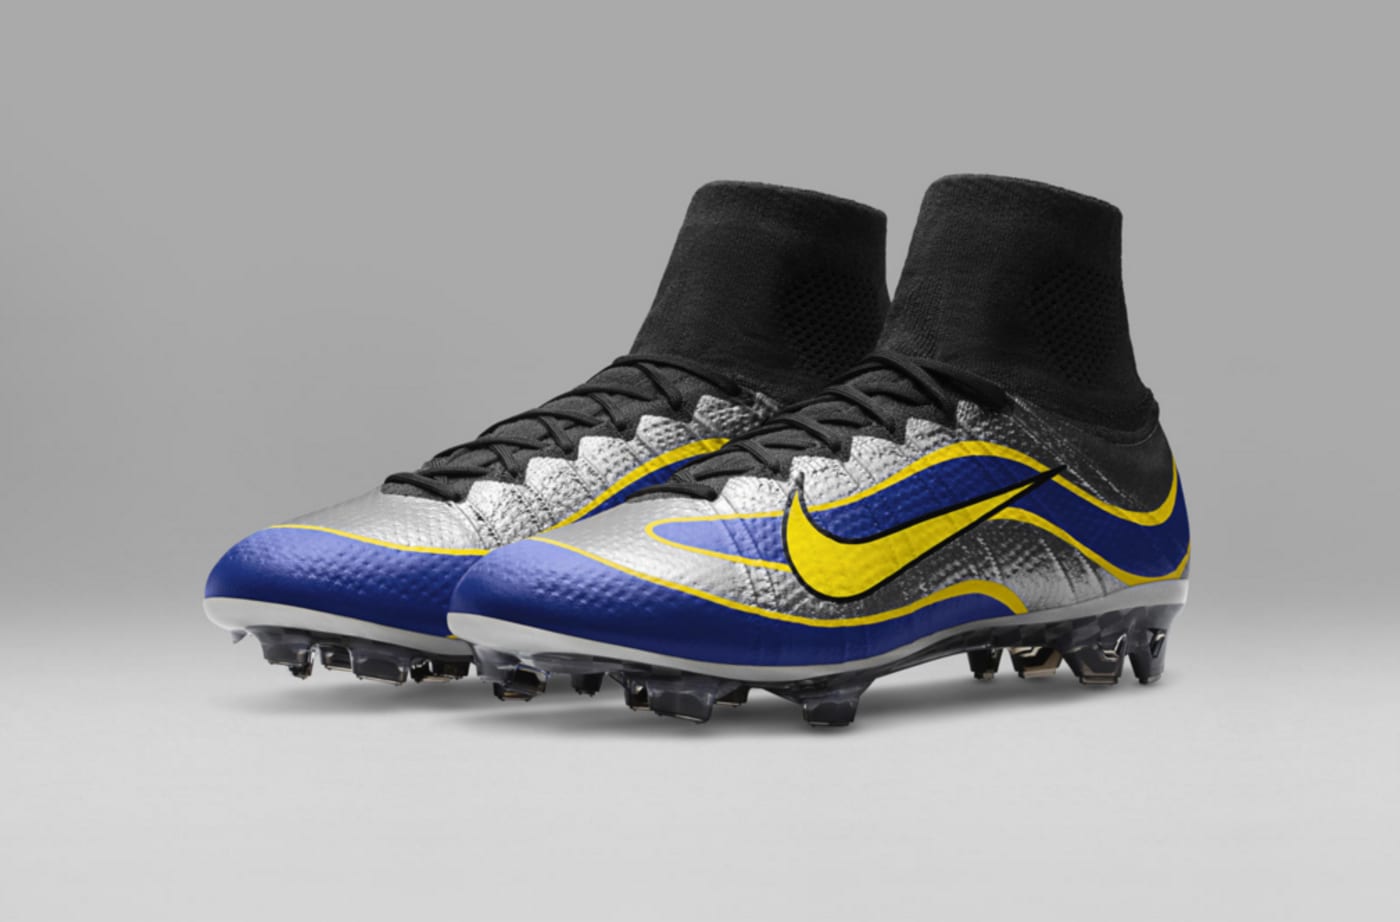 The Nike Mercurial Release Is a Throwback to One of the Most Iconic Boots of All Time | UK